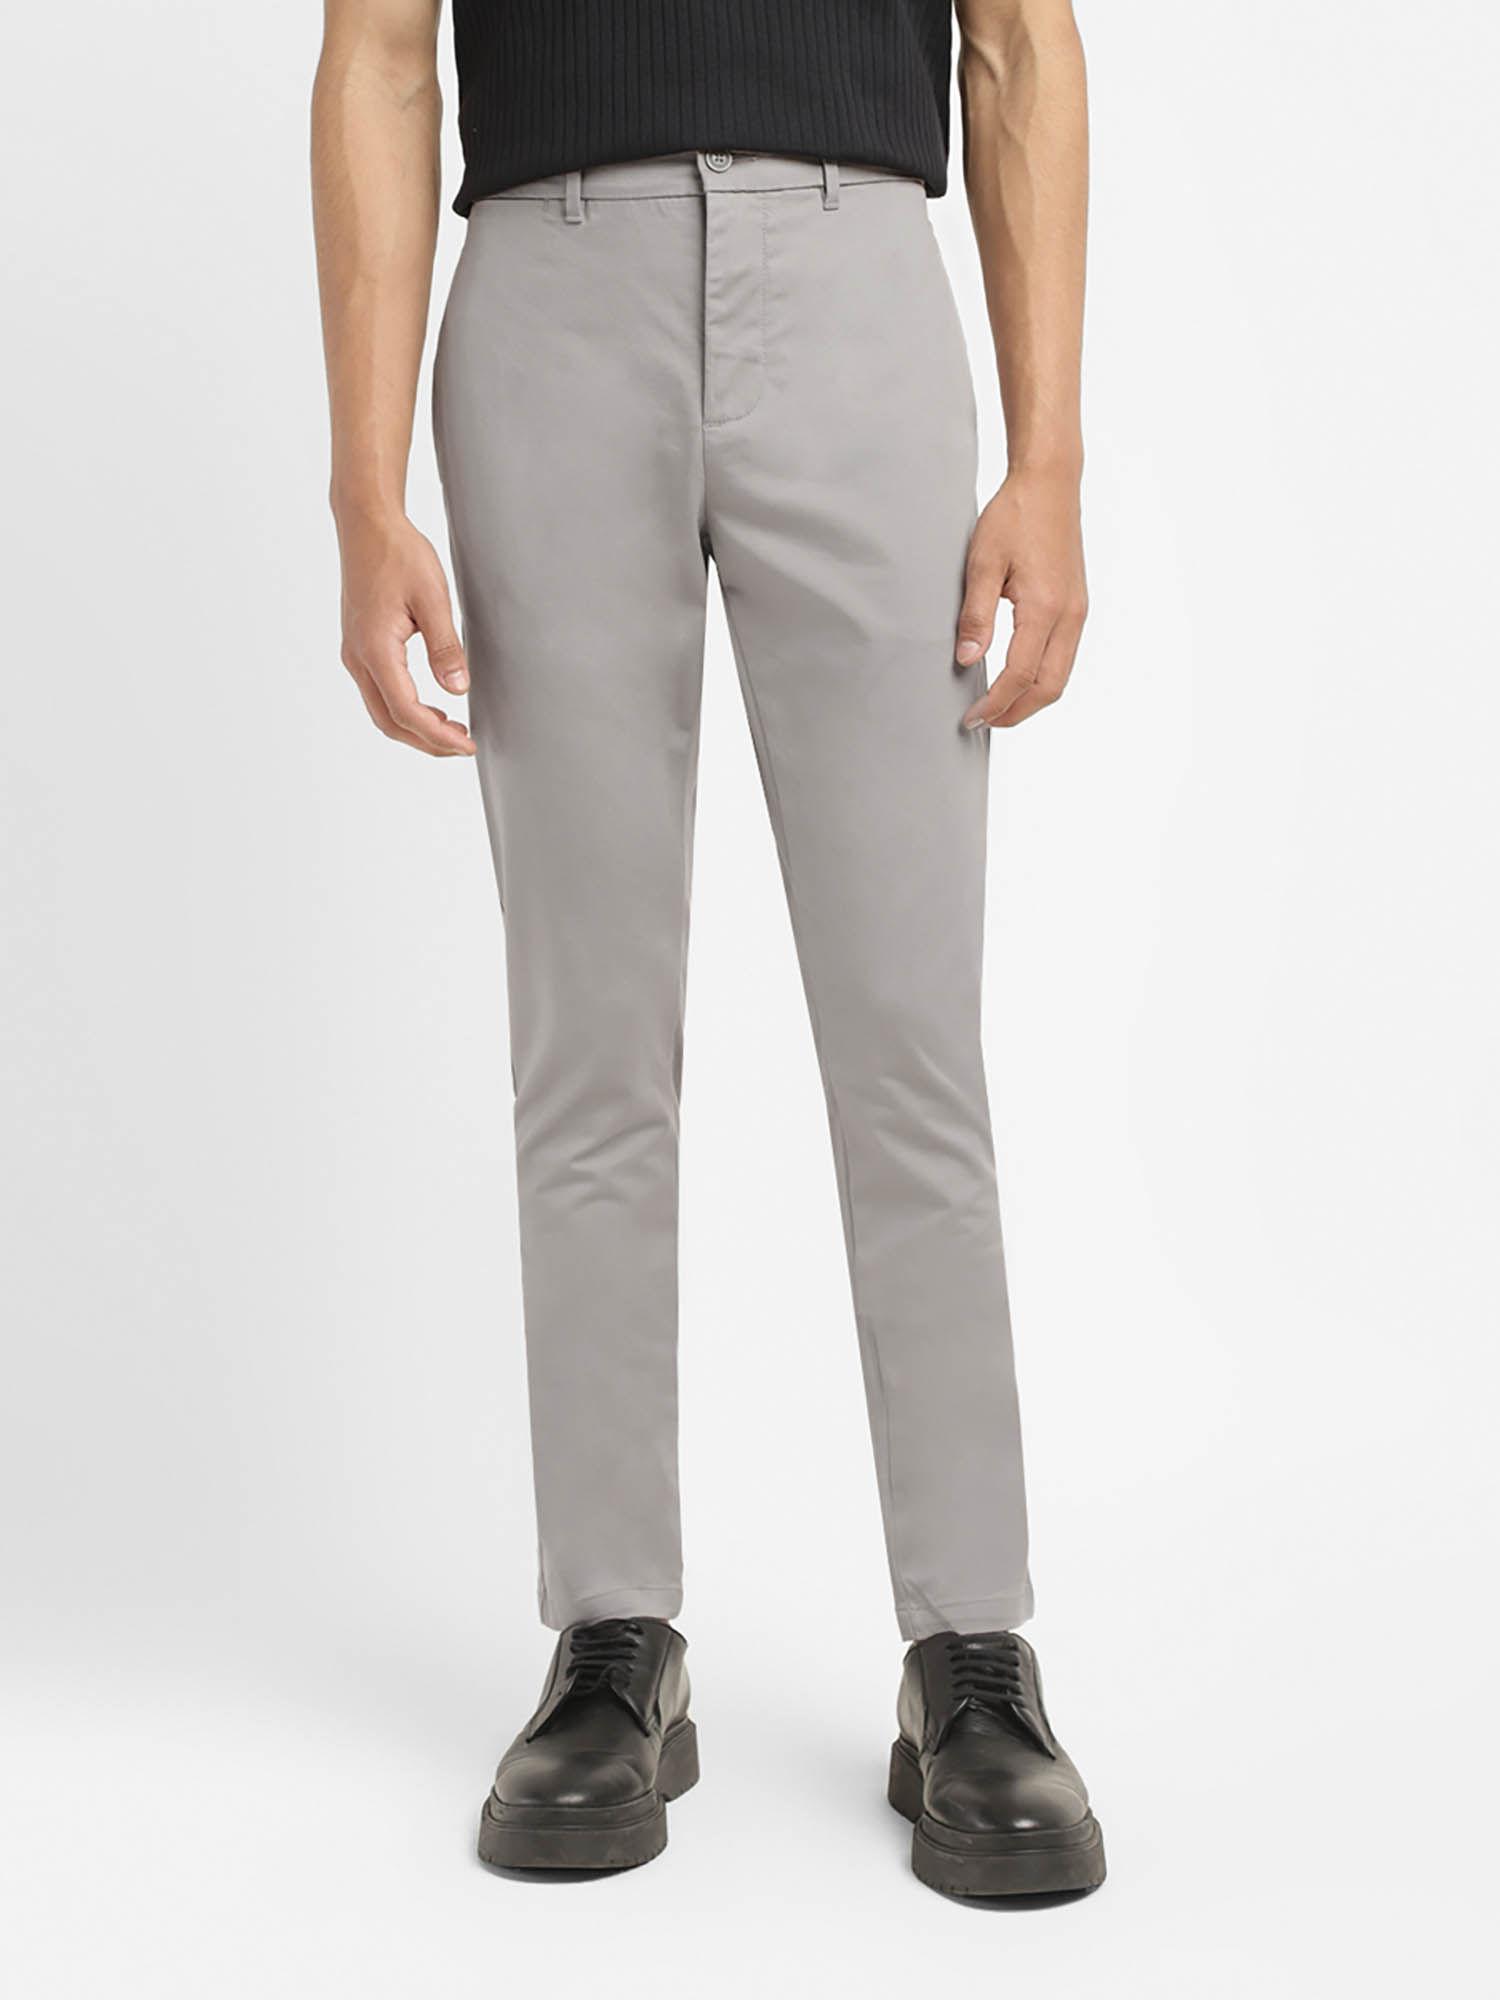 mens 512 grey slim tapered fit chinos